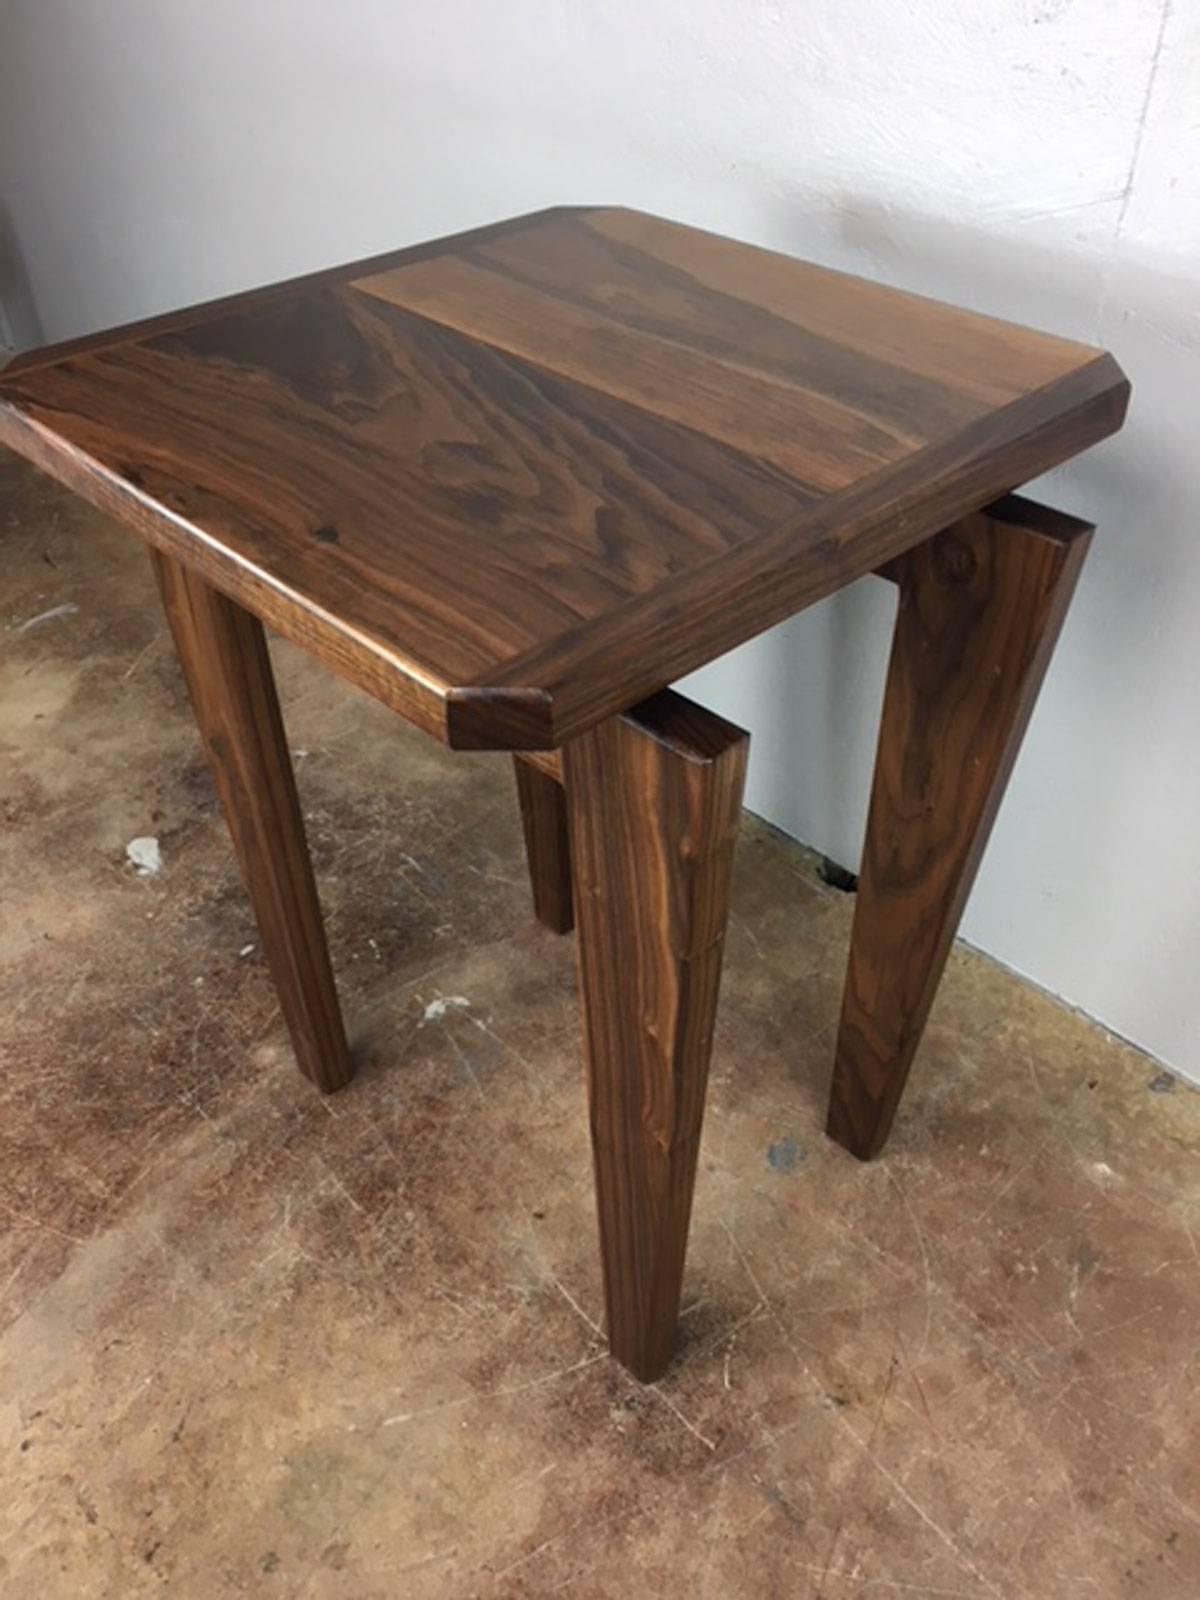 Adrian Pearsall style high pedestal side table. Solid walnut wood. No veneer. Newly custom designed and made.